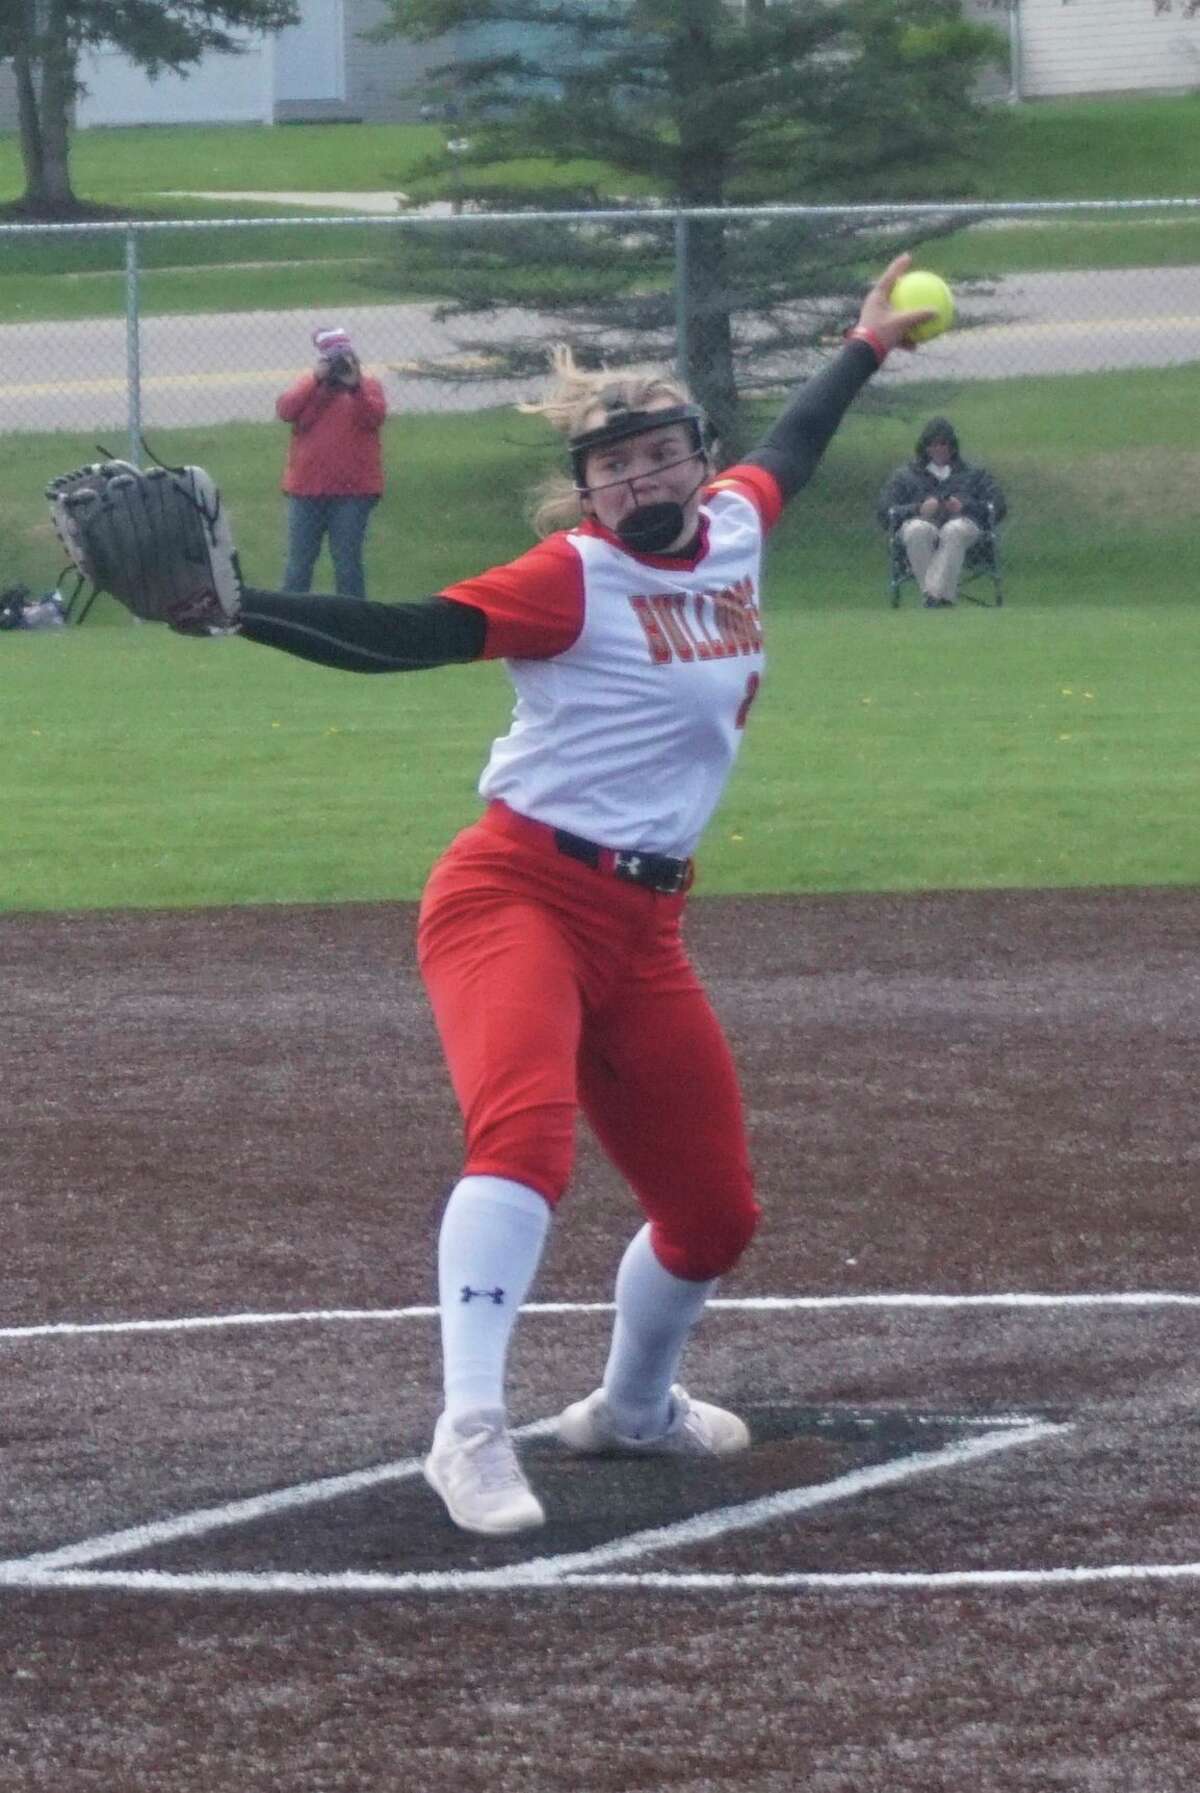 Ferris State lefthander Aryn Gallacher delivers a pitch during game one of a double header against Saginaw Valley State on Wednesday afternoon. (Pioneer photo/Joe Judd)